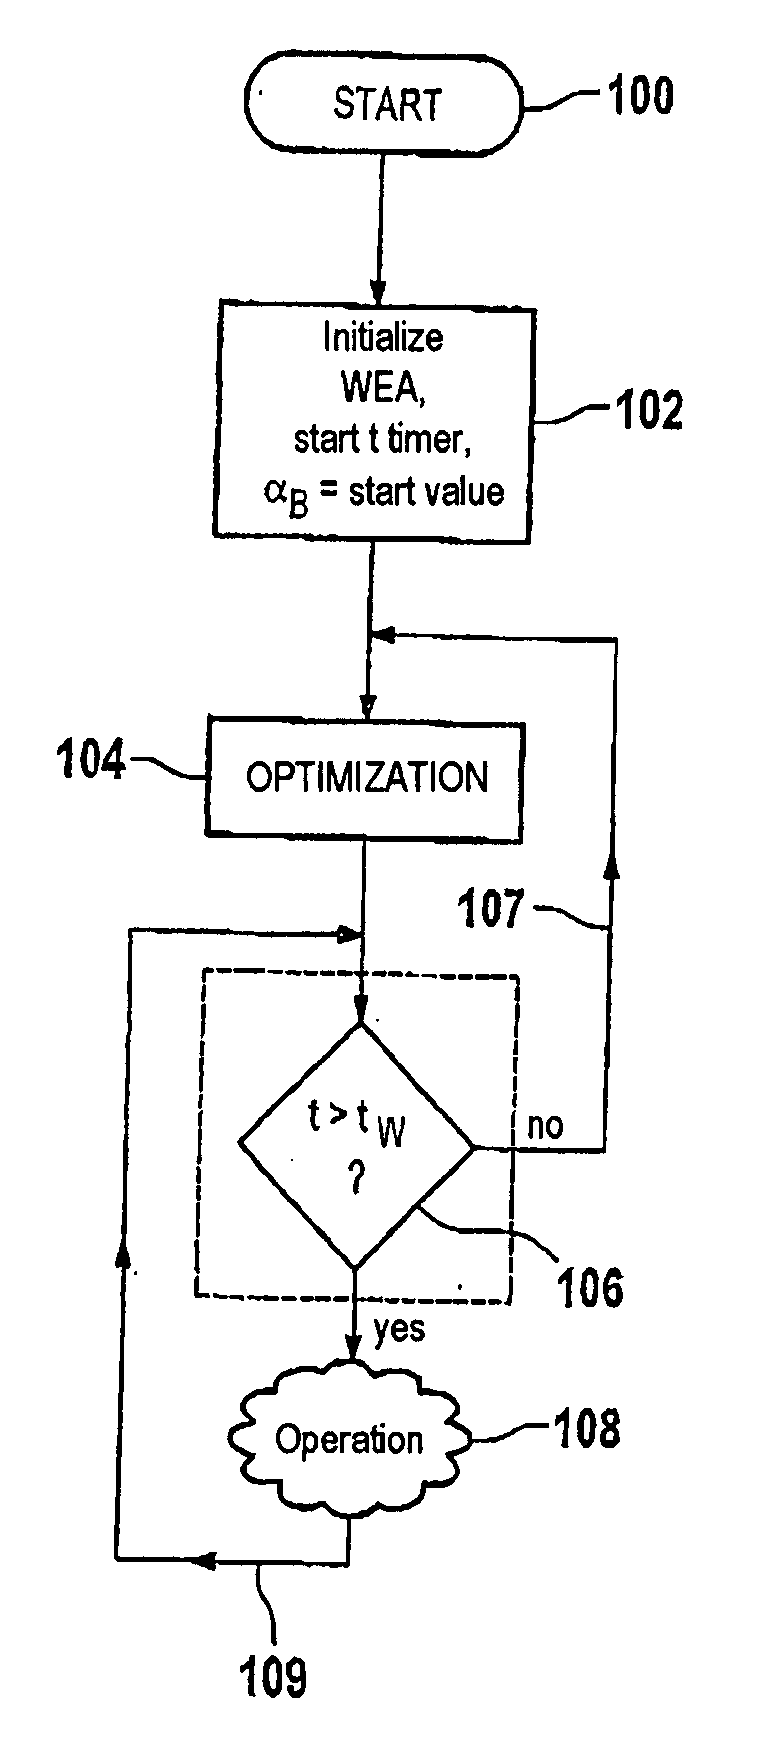 Method for Optimizing Operational Parameters on Wind Farms